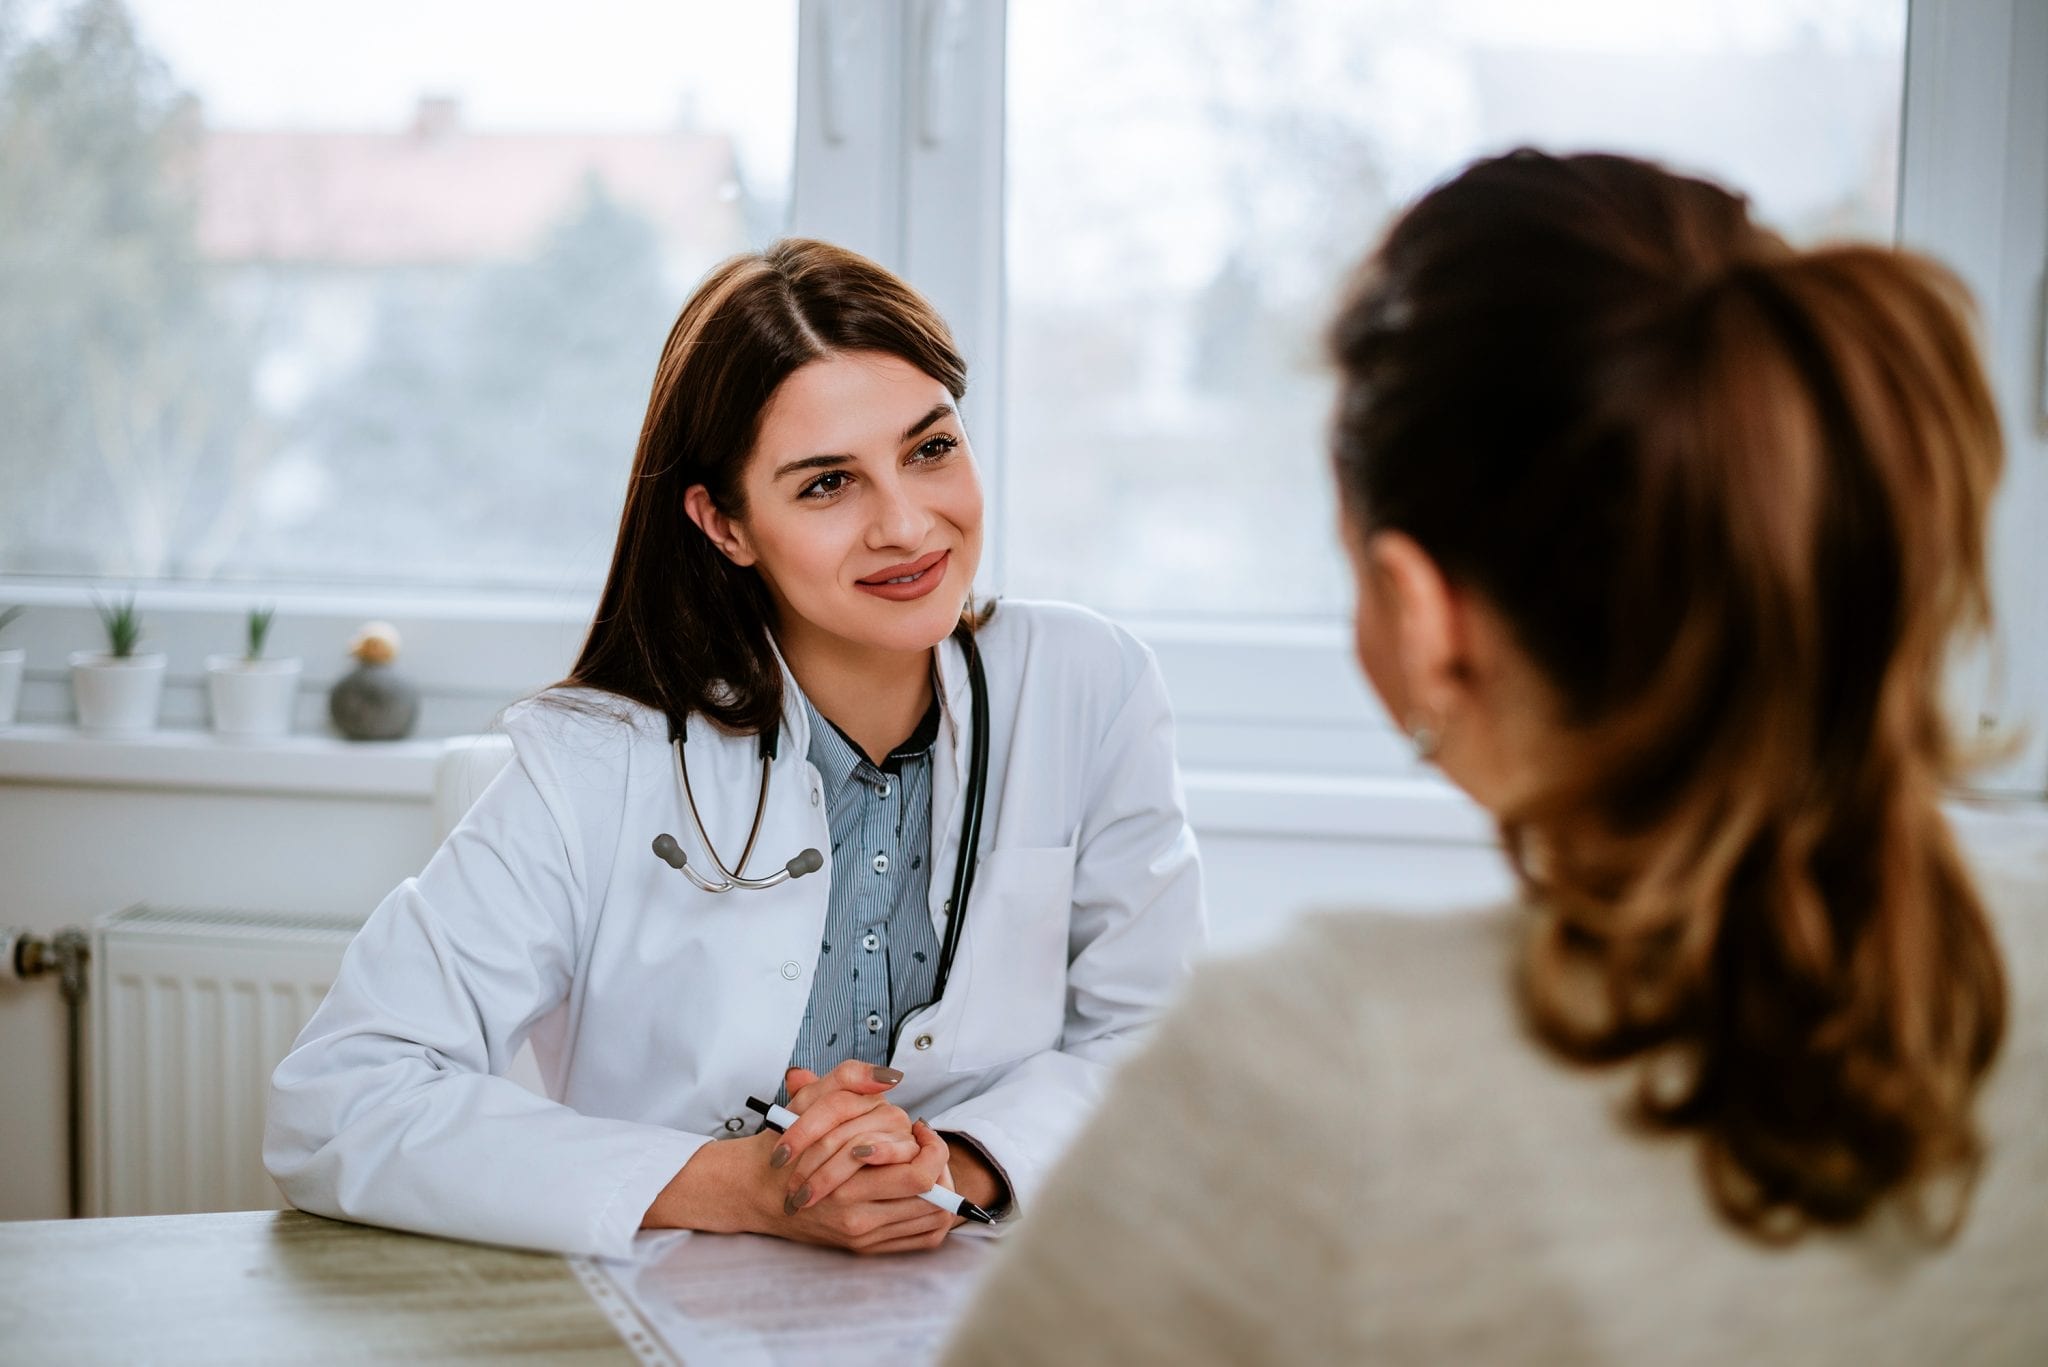 22 Questions to Ask When Interviewing a Pediatrician